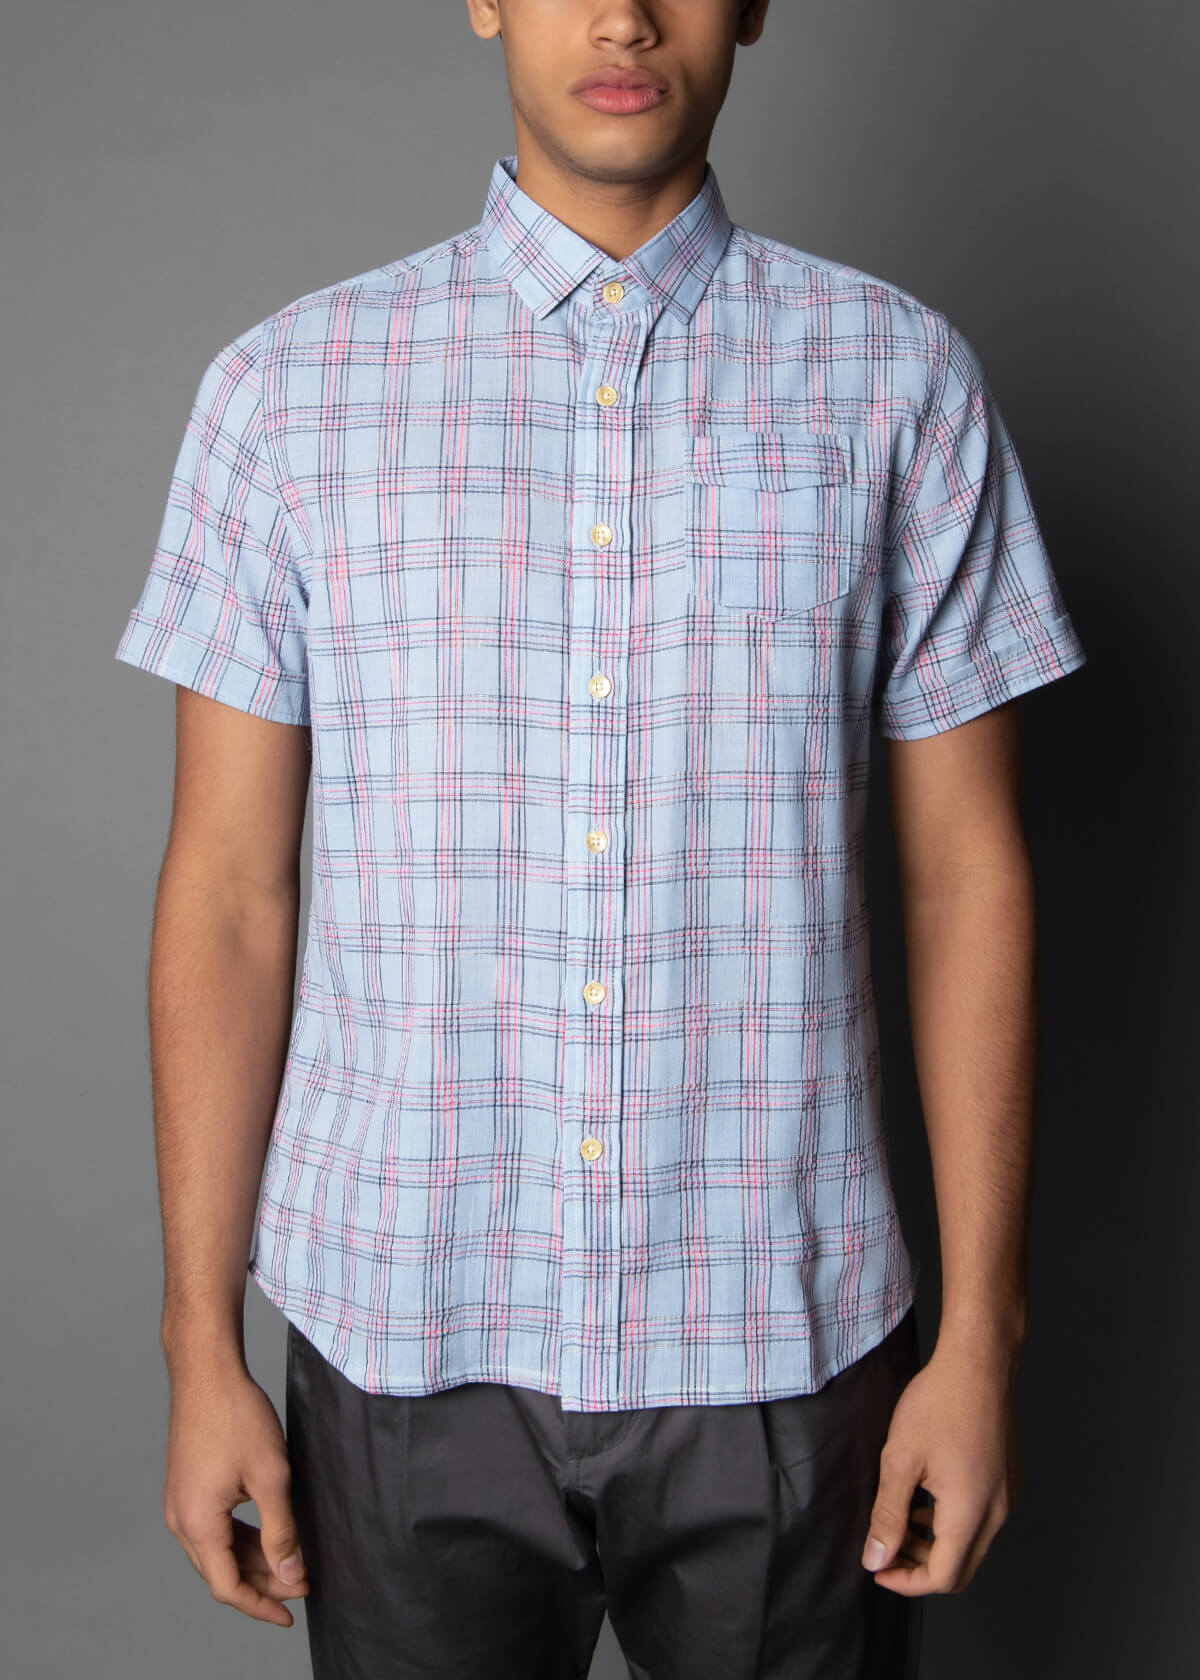 pink and blue plaid short sleeve shirt for men